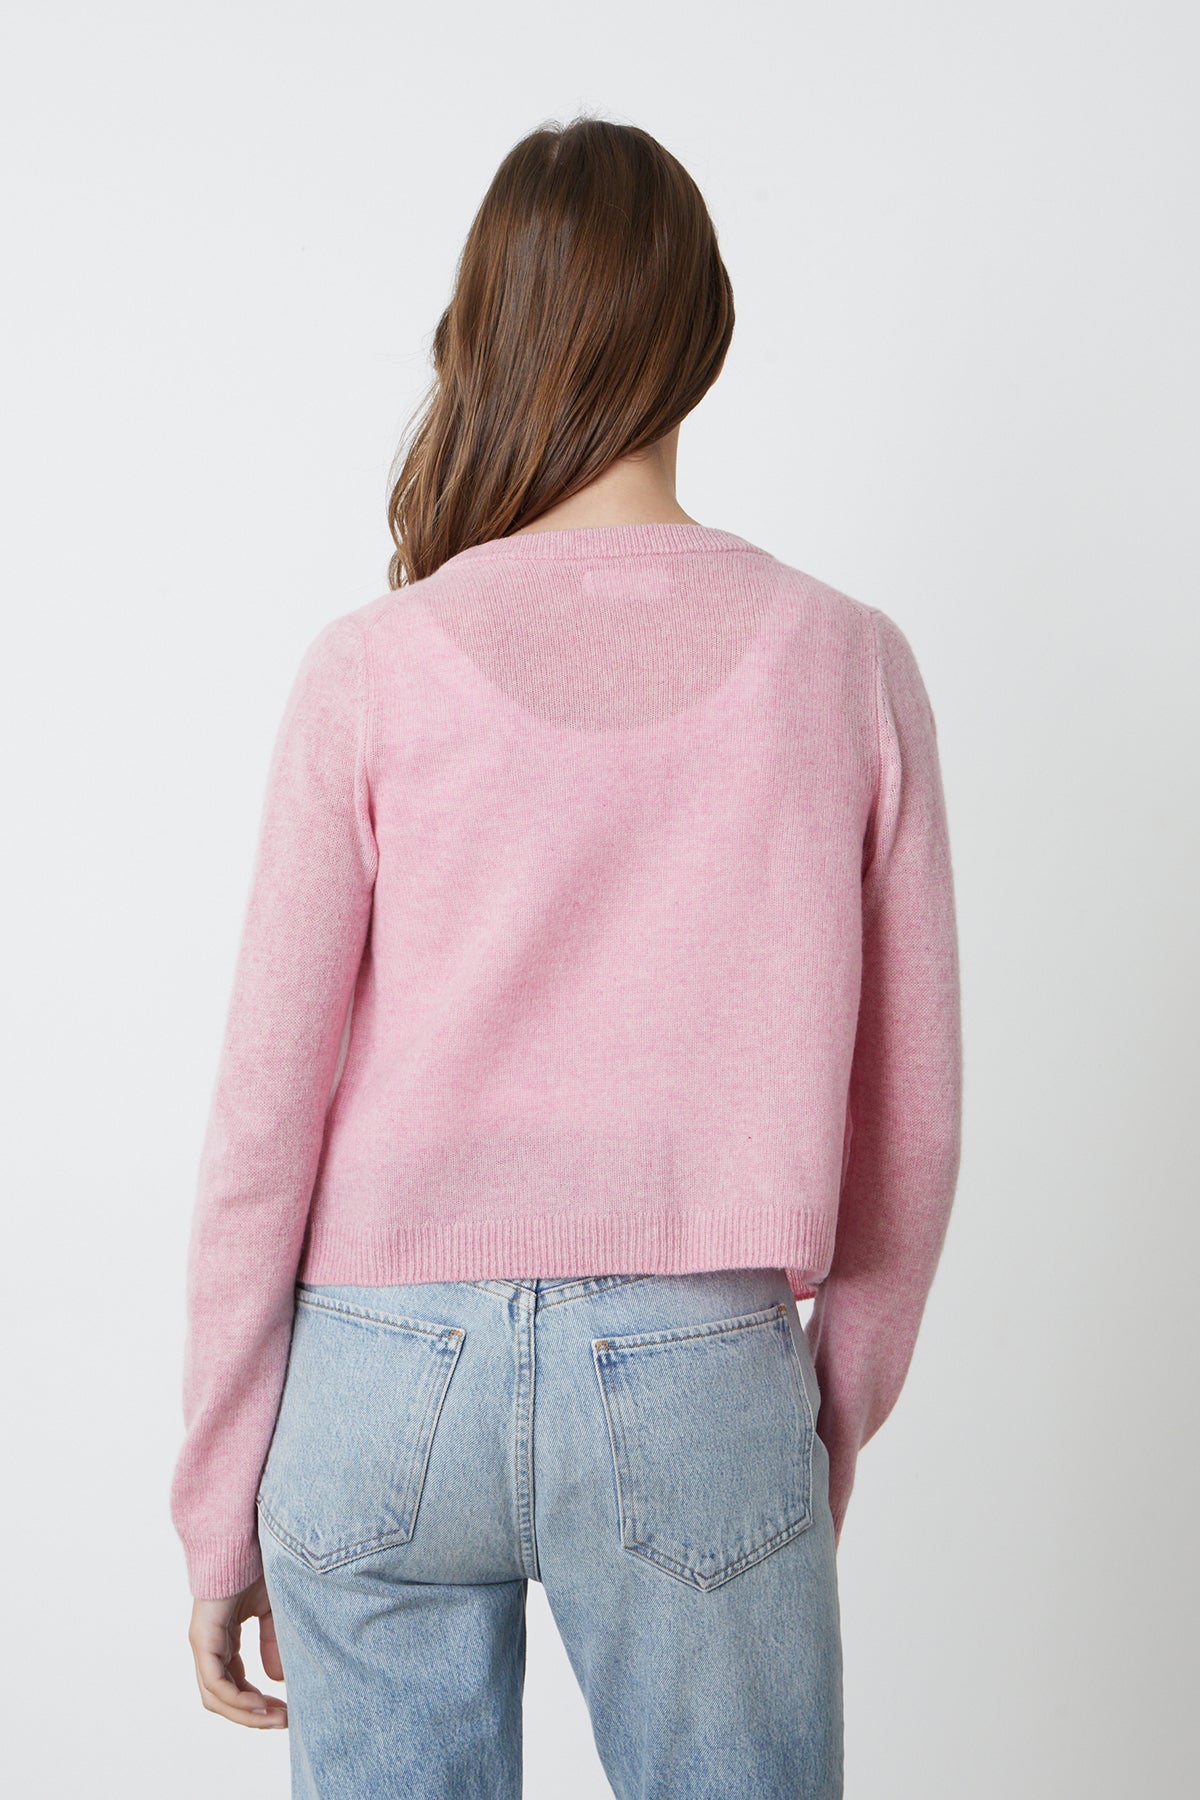   the back view of a woman wearing a NANI CASHMERE CARDIGAN by Velvet by Graham & Spencer and jeans. 